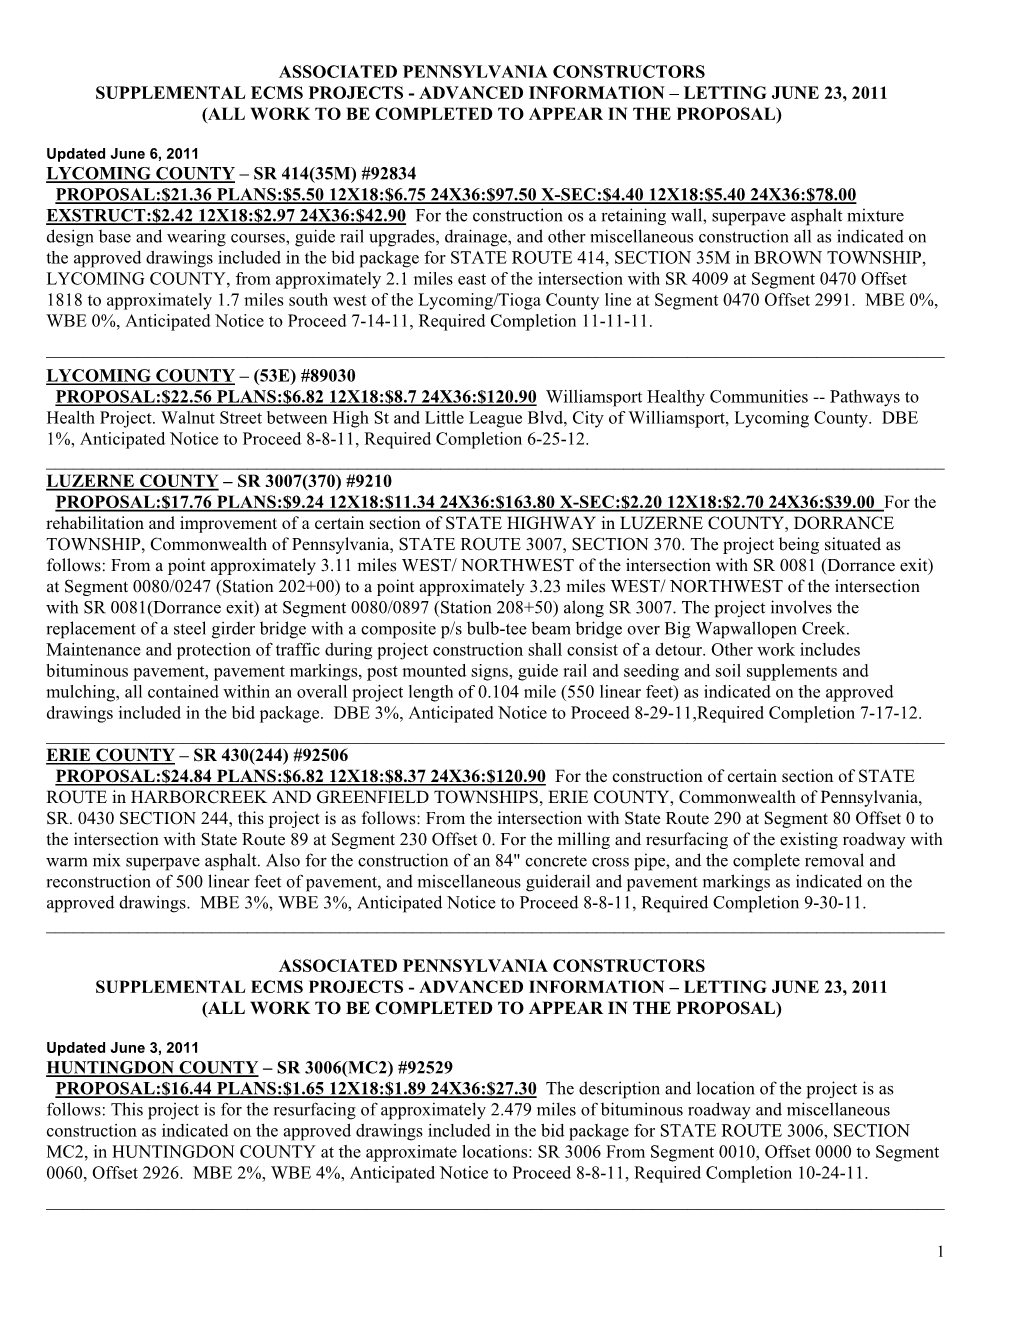 Associated Pennsylvania Constructors Supplemental Ecms Projects - Advanced Information – Letting June 23, 2011 (All Work to Be Completed to Appear in the Proposal)